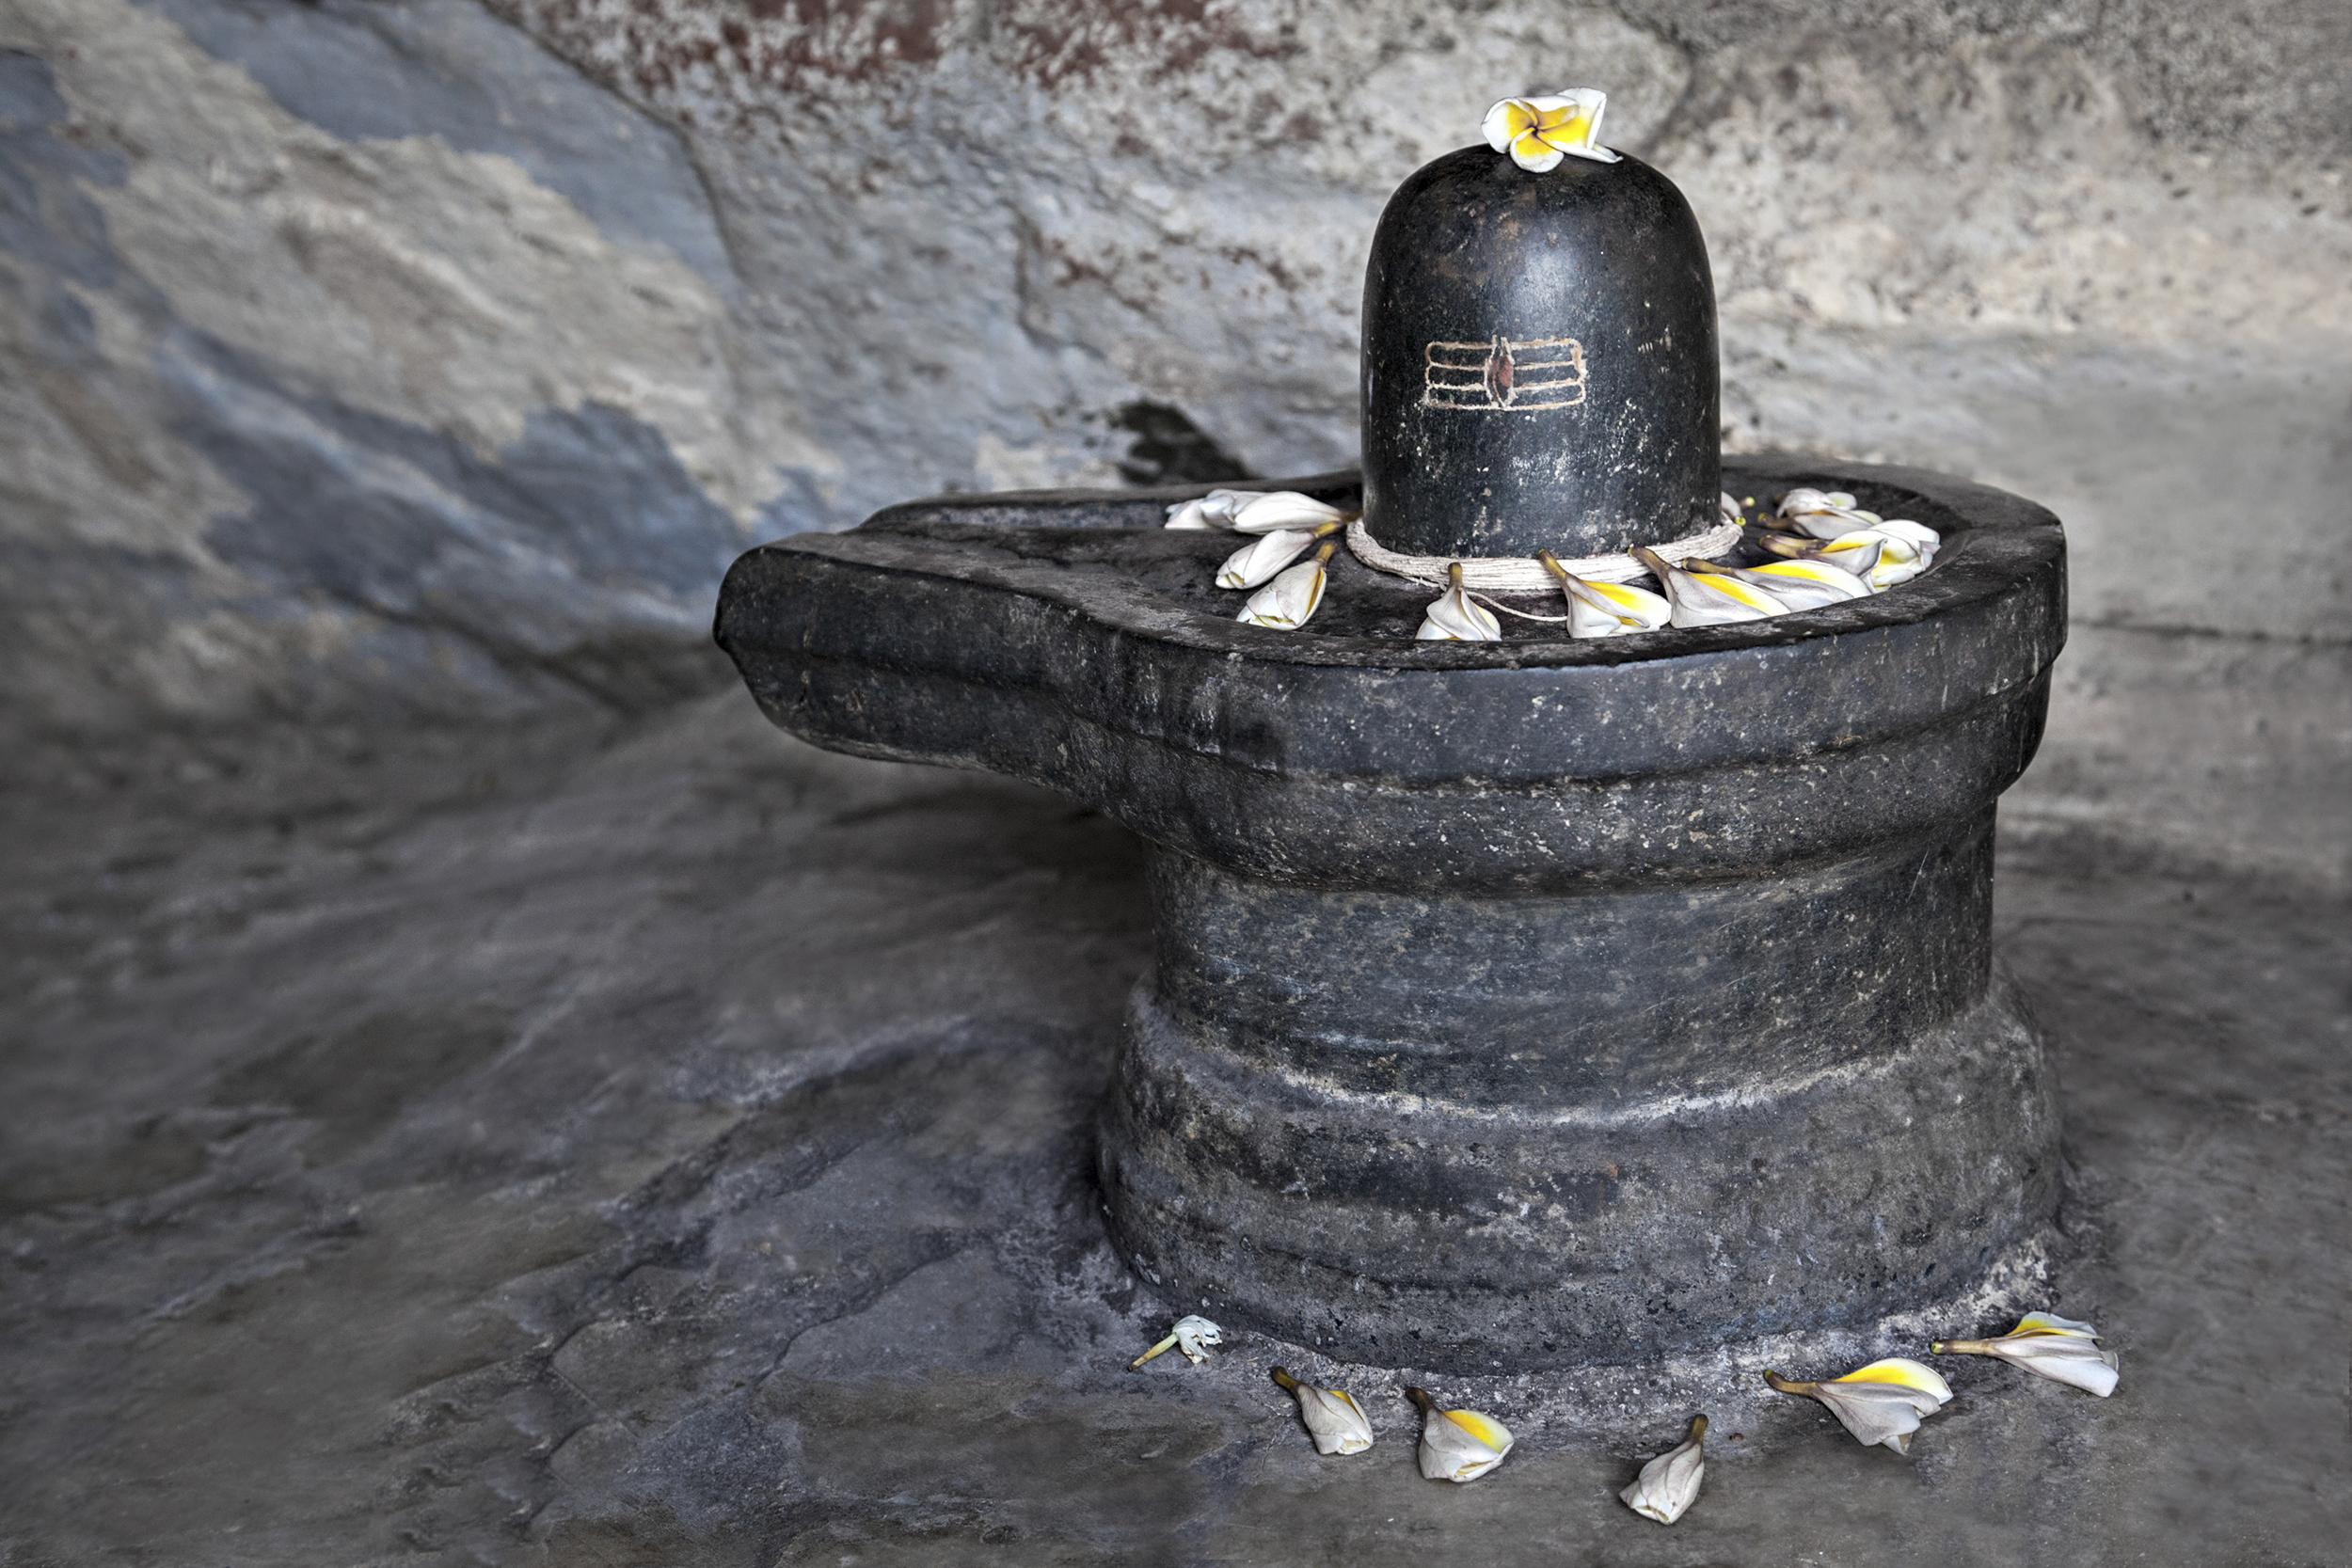 How To Worship Shiva Lingam At Home - 5 steps